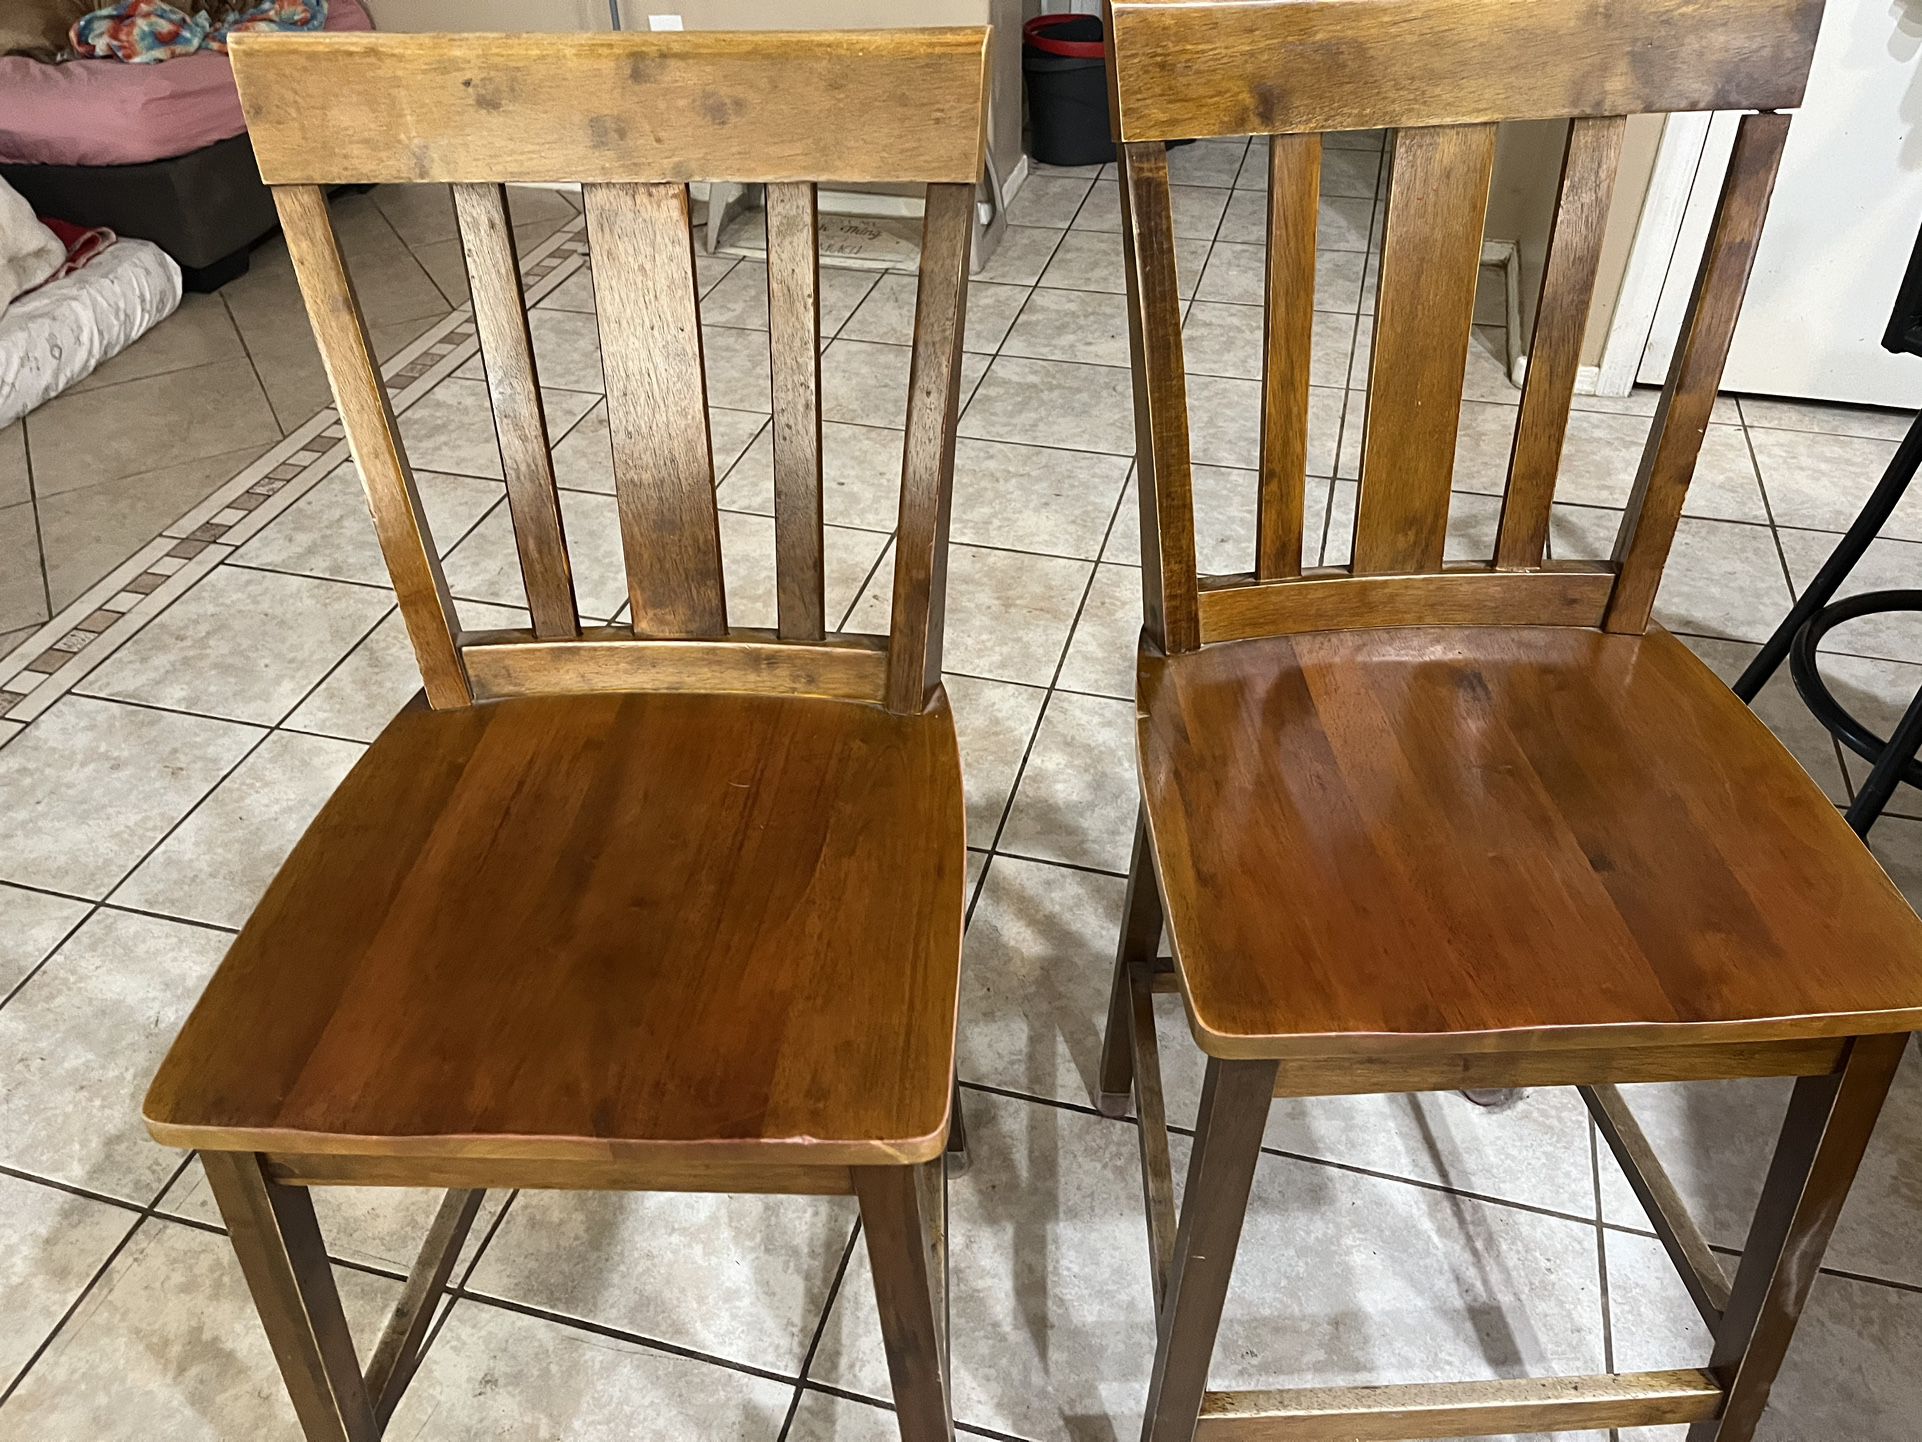 Two Bar stool Chairs